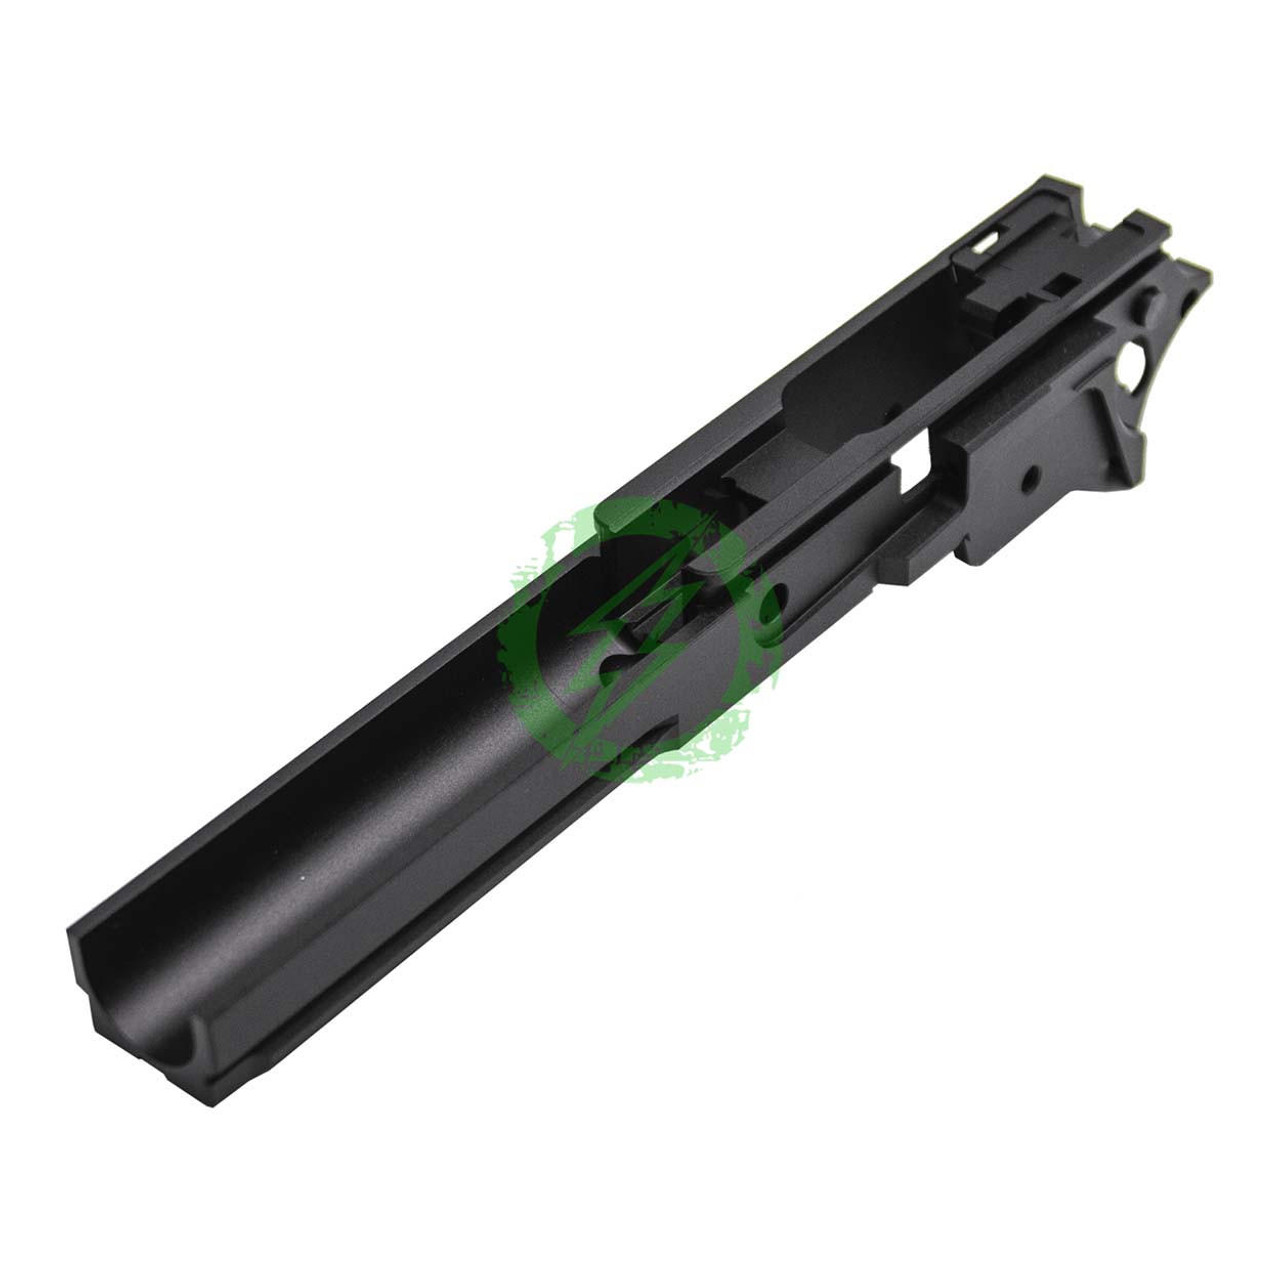 Airsoft Masterpiece Custom Airsoft Masterpiece Aluminum Advance Frame with Tactical Rail Infinity 4.3 